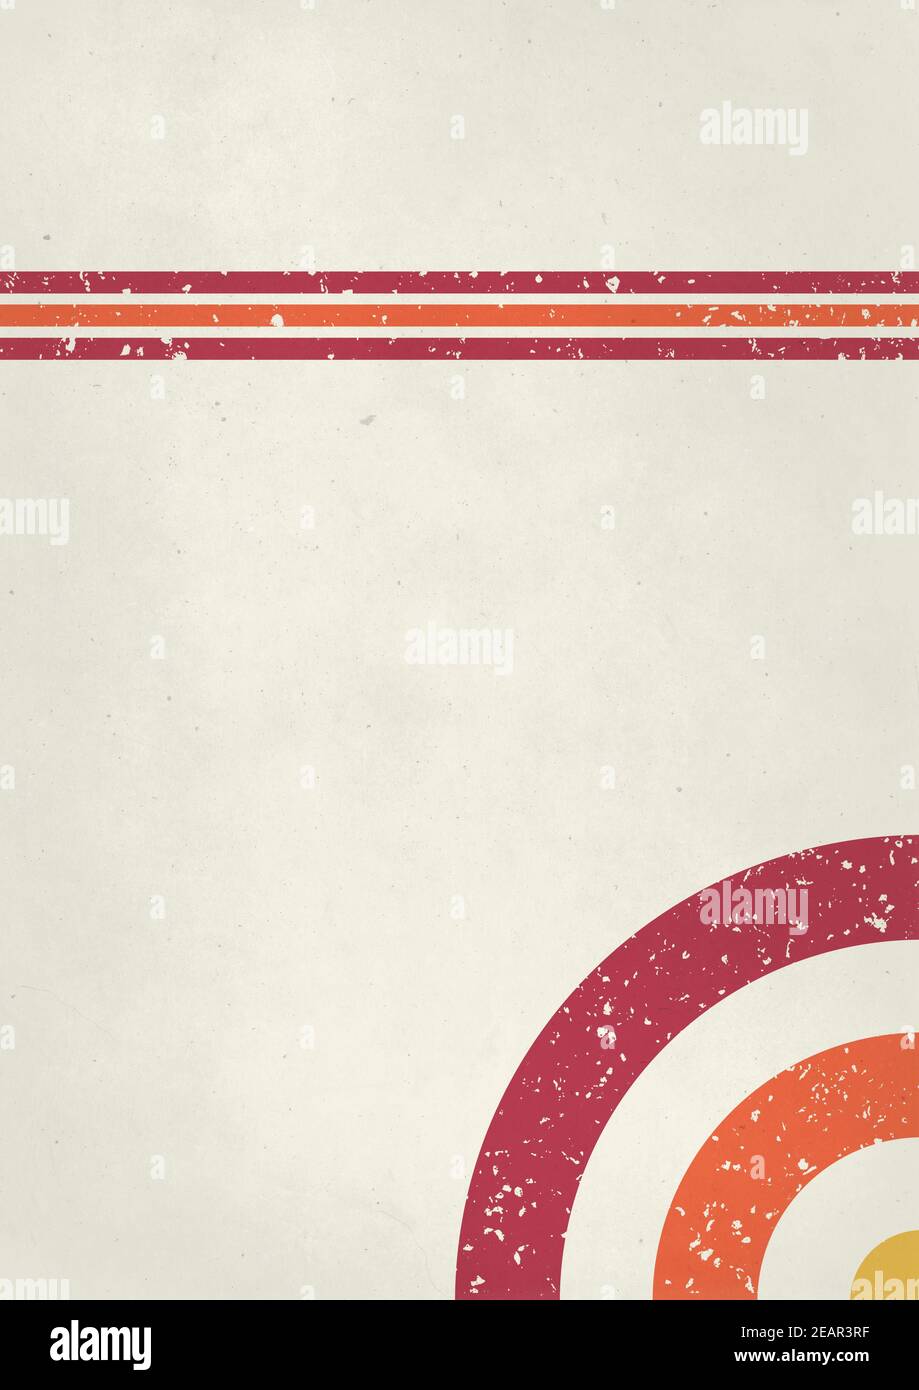 A retro 1970's or 1980's dark graphic background design for use as a product, poster or flyer background with orange and red stripes with ringed corne Stock Photo